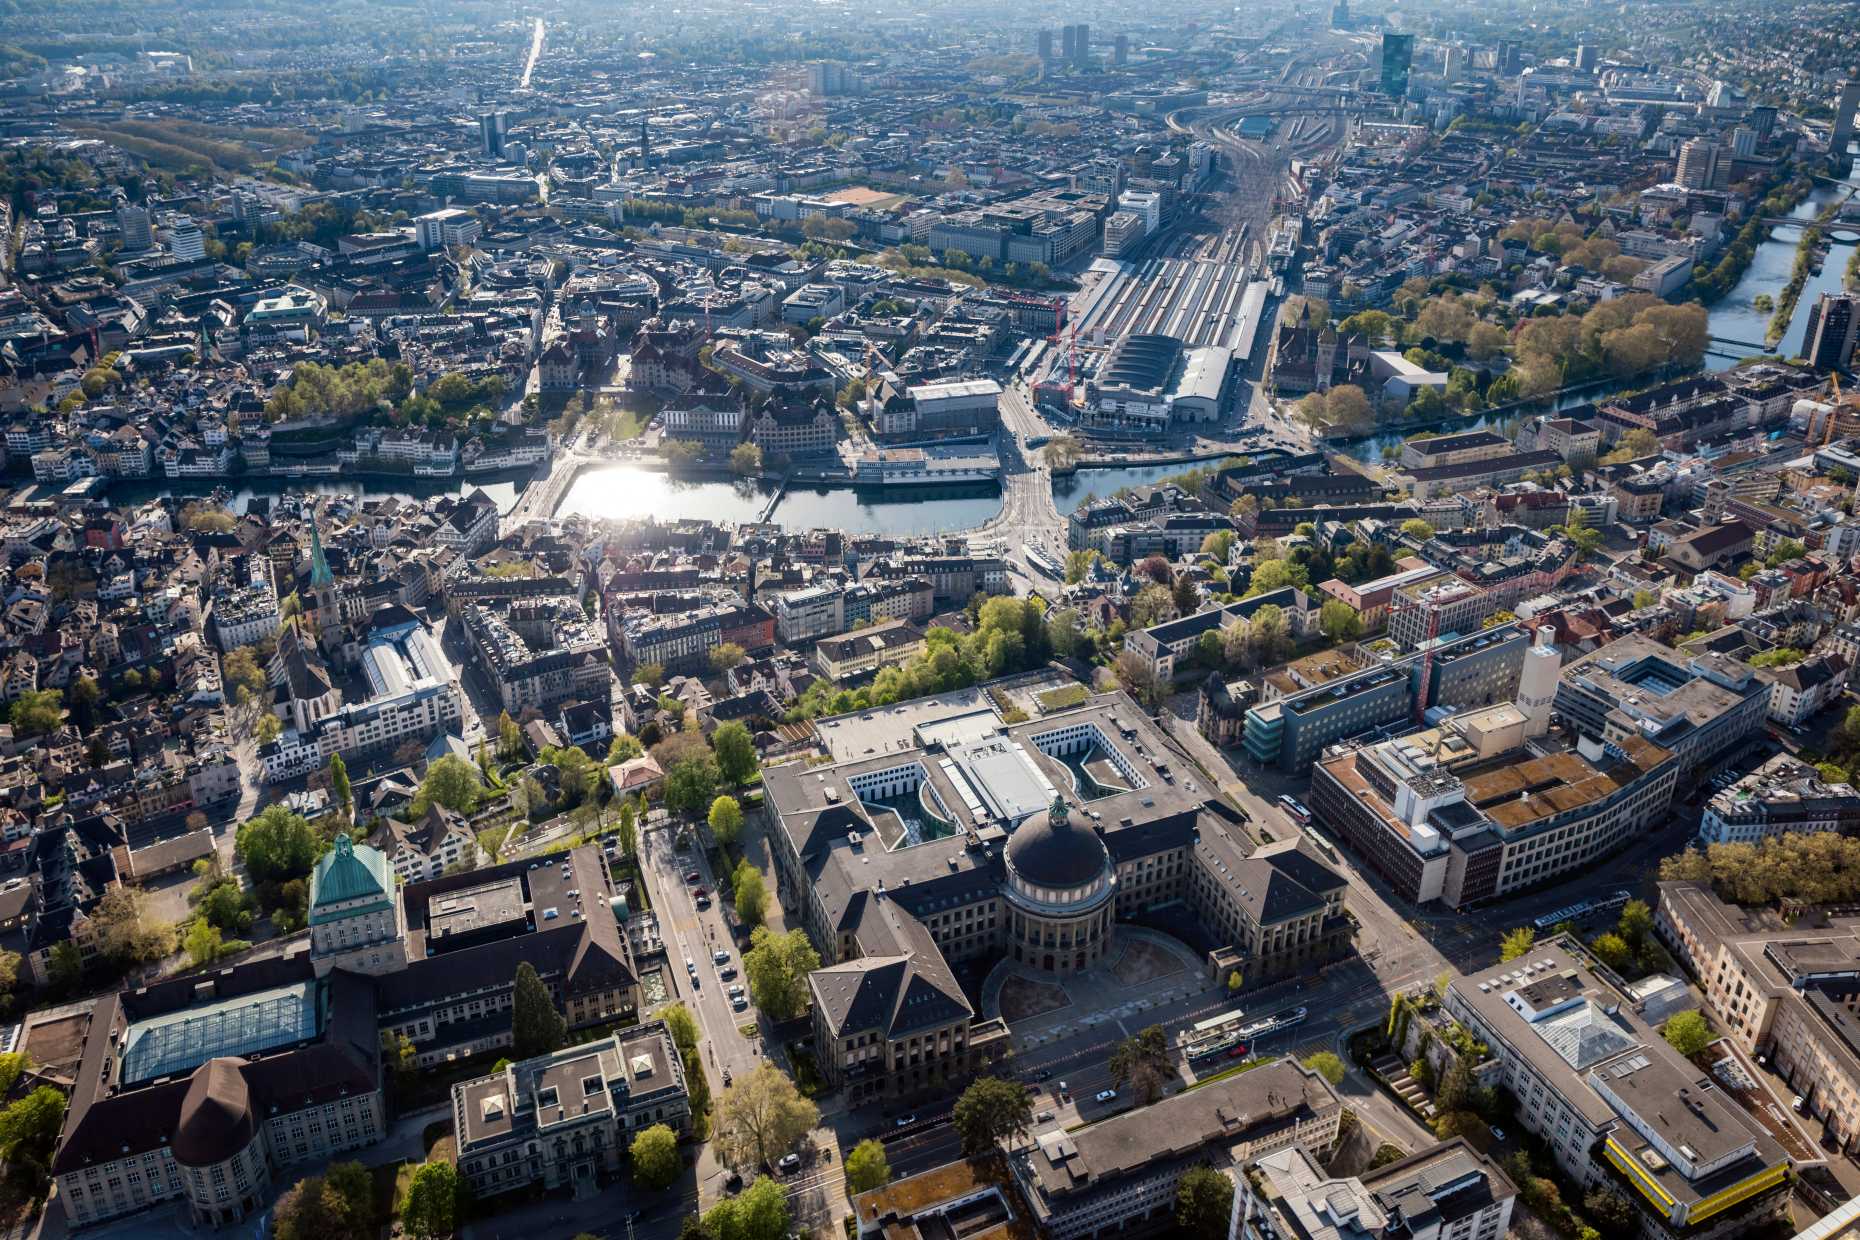 The campus of ETH Zurich as seen from above.